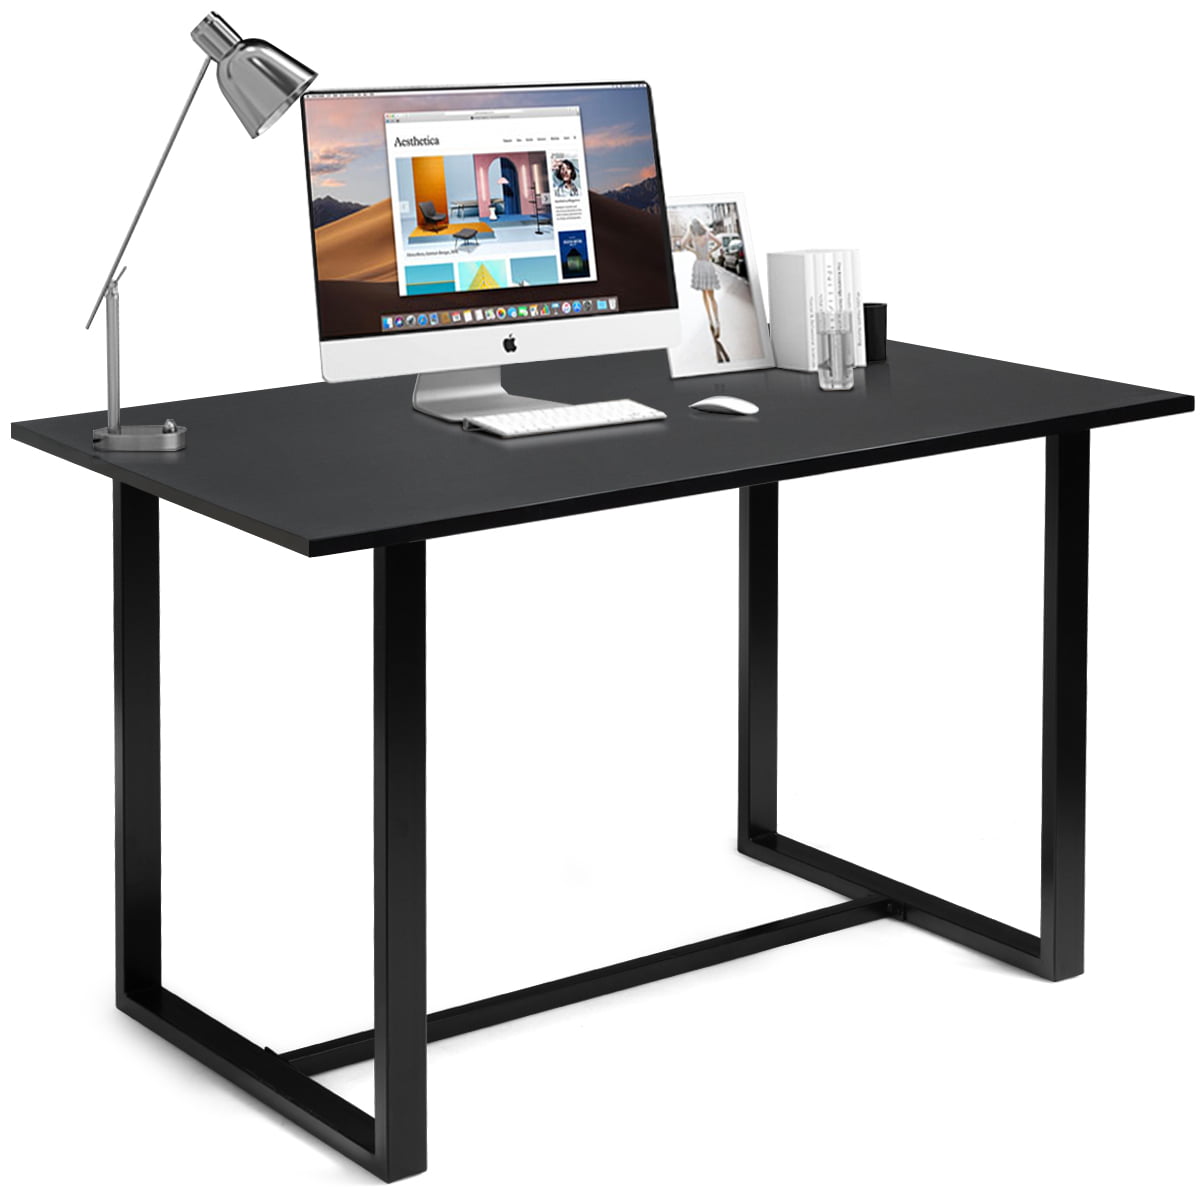 Maple 48 x 24 Gaming Linea Italia Gamind Large Easy to Assemble Metal Desk with Wood Top Computer Table for Home or Office